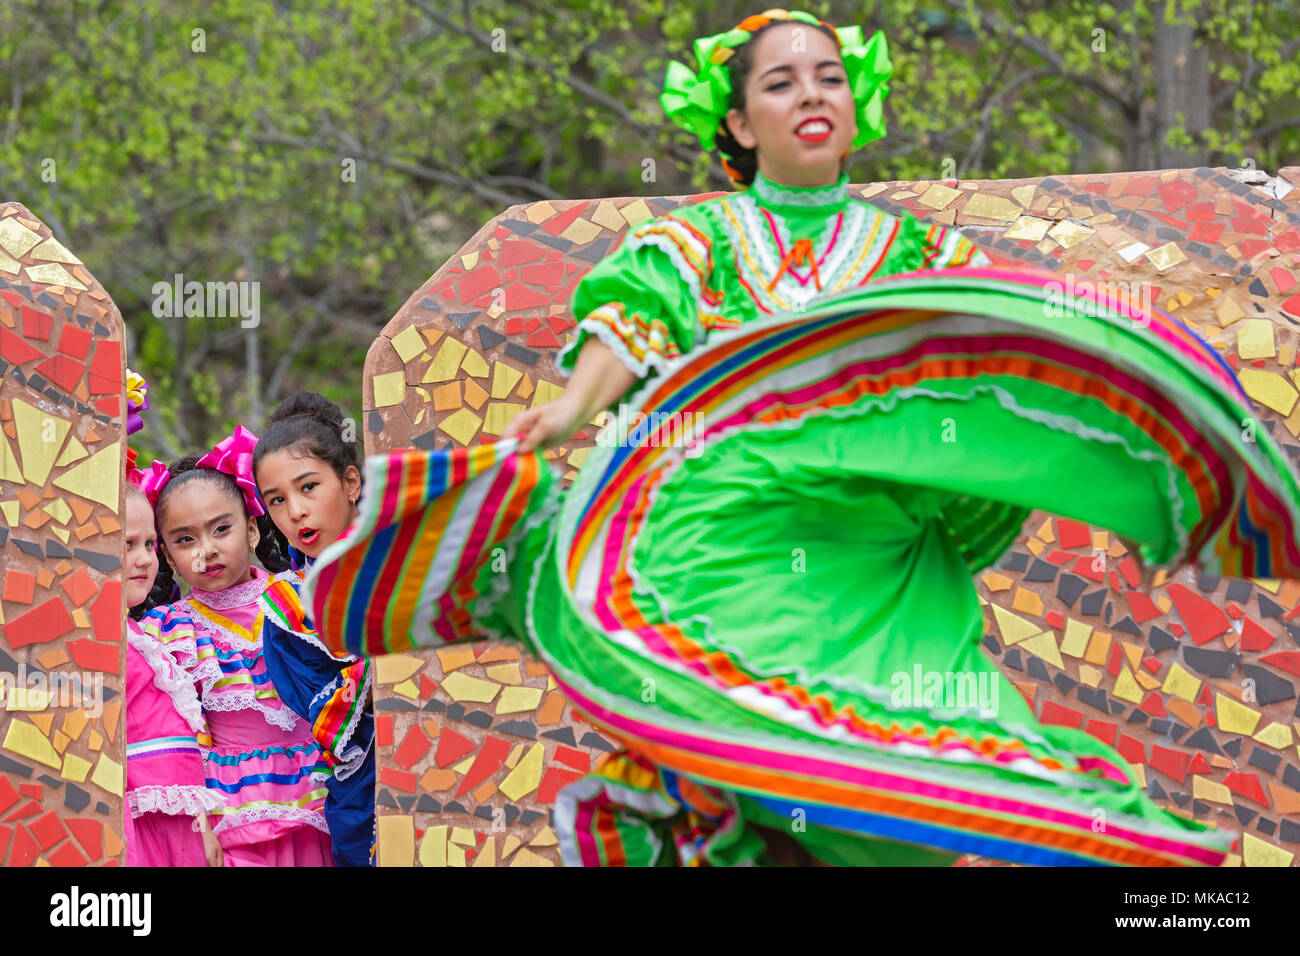 Detroit, Michigan USA - 6 May 2018 - Young Mexican dancers watch as an older dancer performs during Detroit's Cinco de Mayo celebration. Credit: Jim West/Alamy Live News Stock Photo